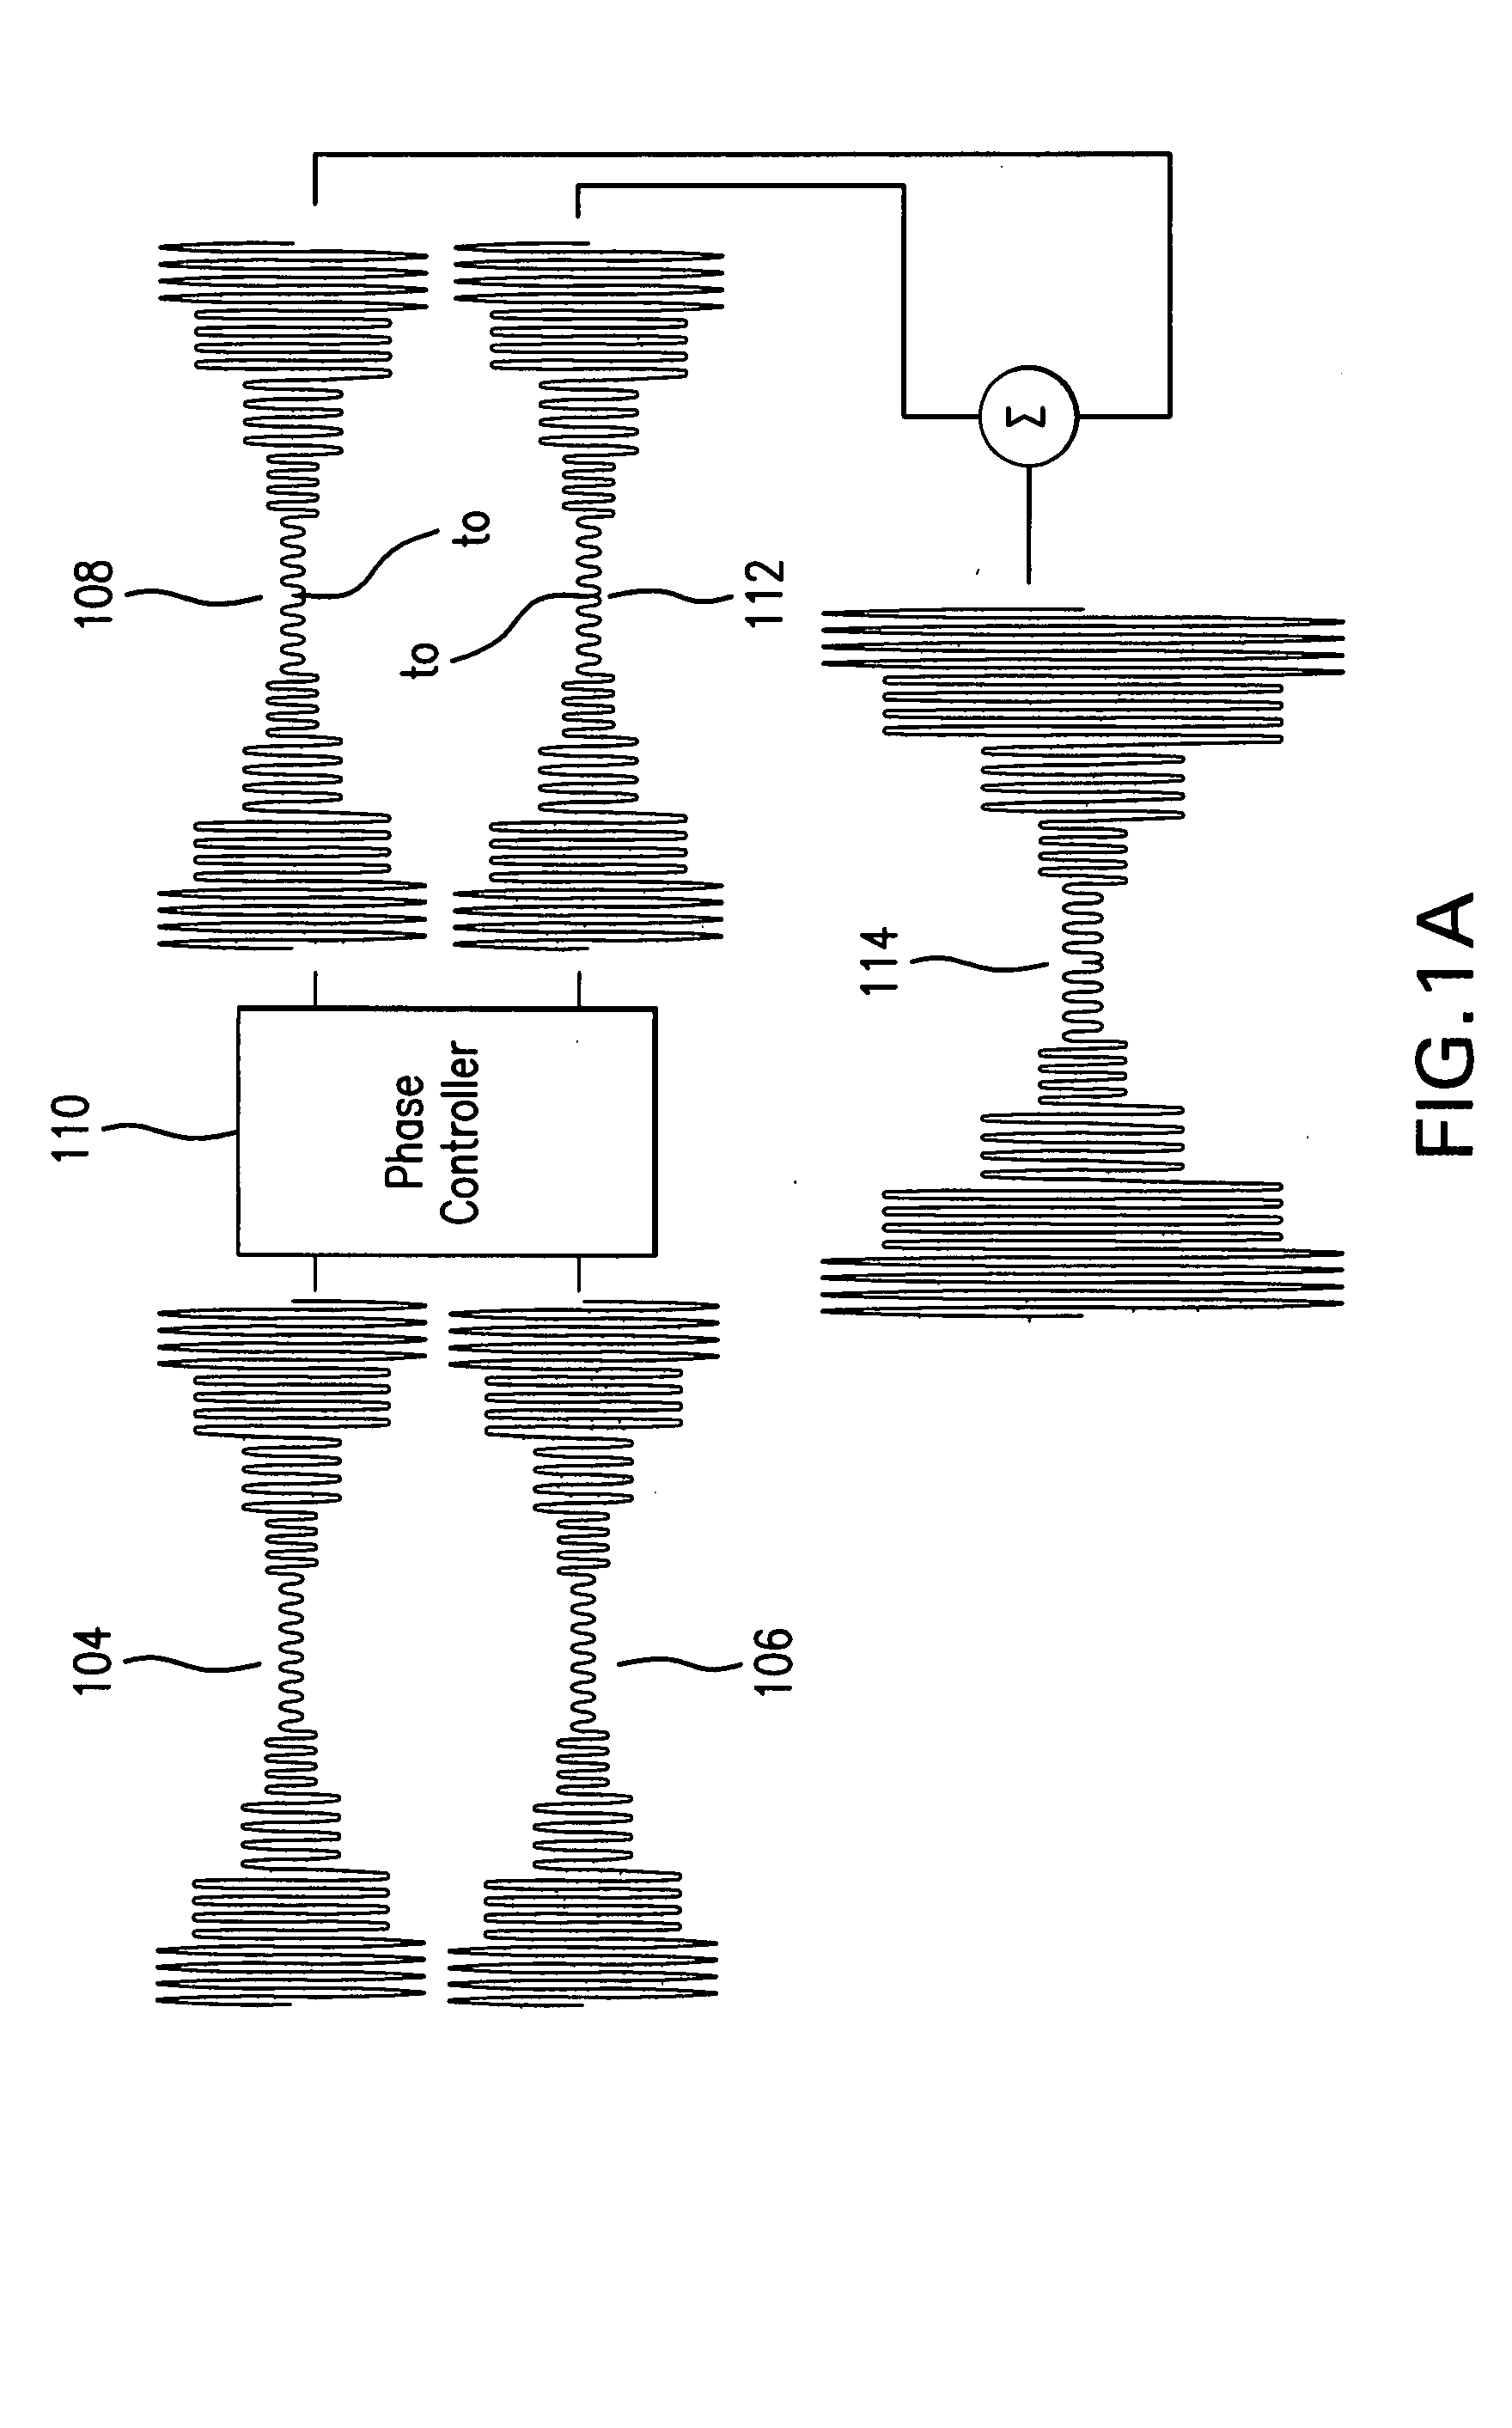 Systems and methods of RF power transmission, modulation, and amplification, including architectural embodiments of same